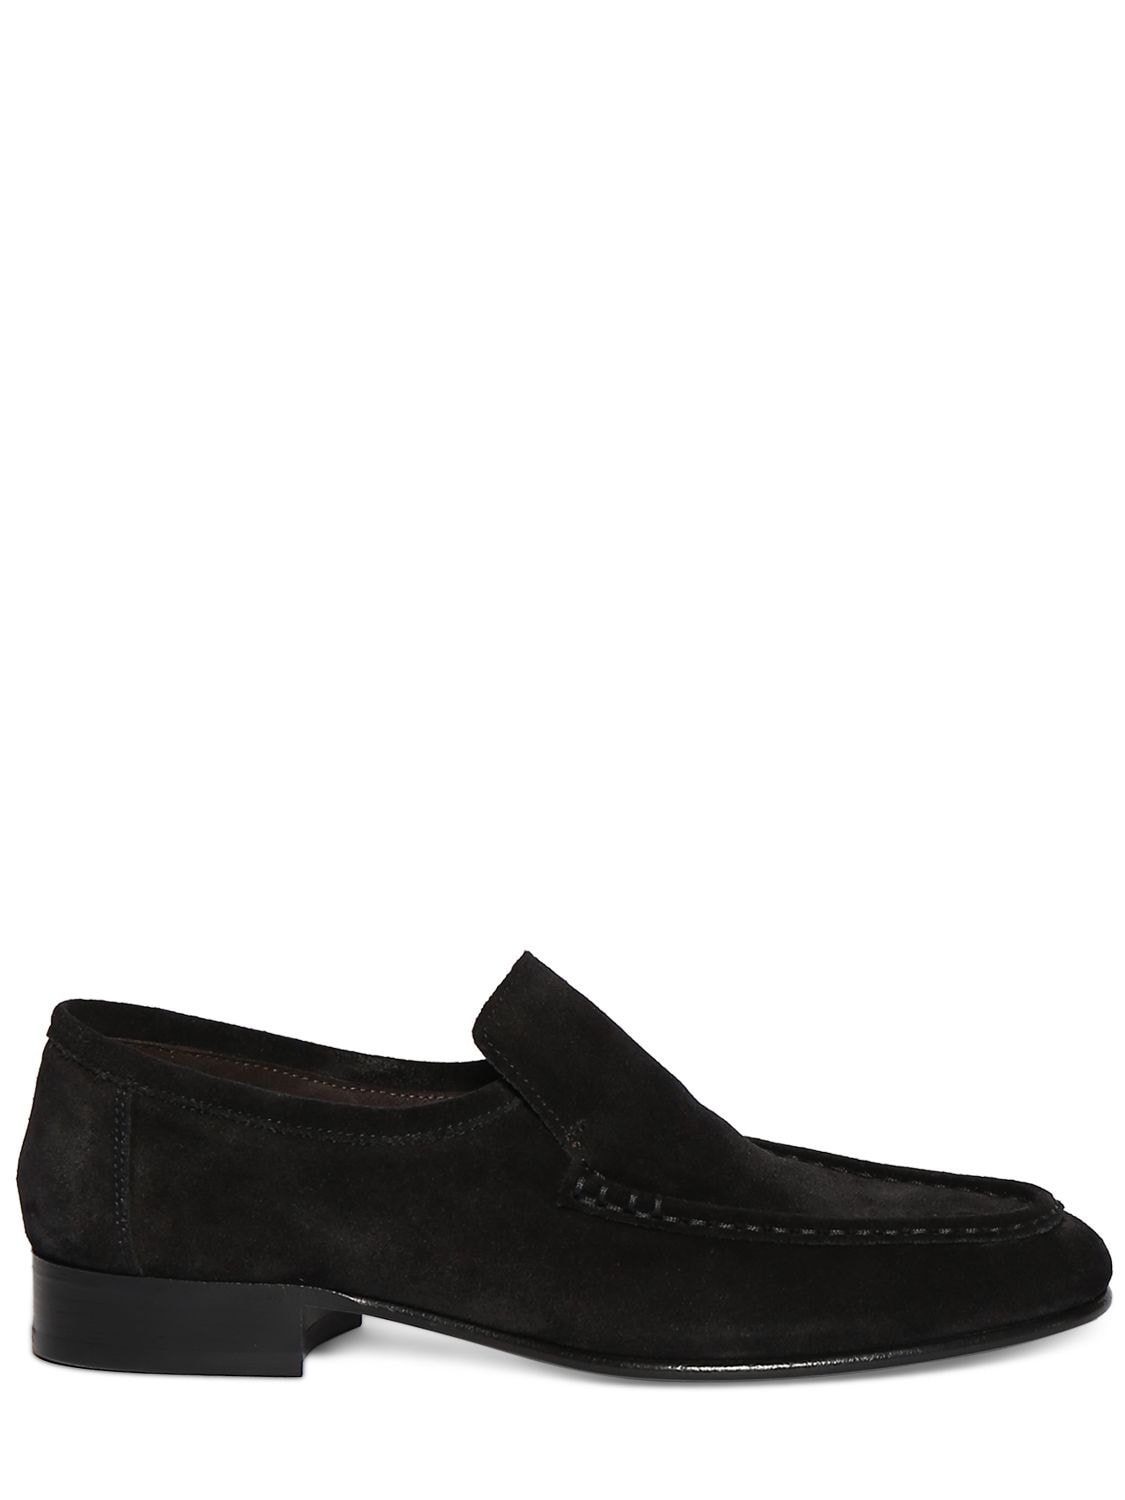 Image of New Soft Suede Loafers